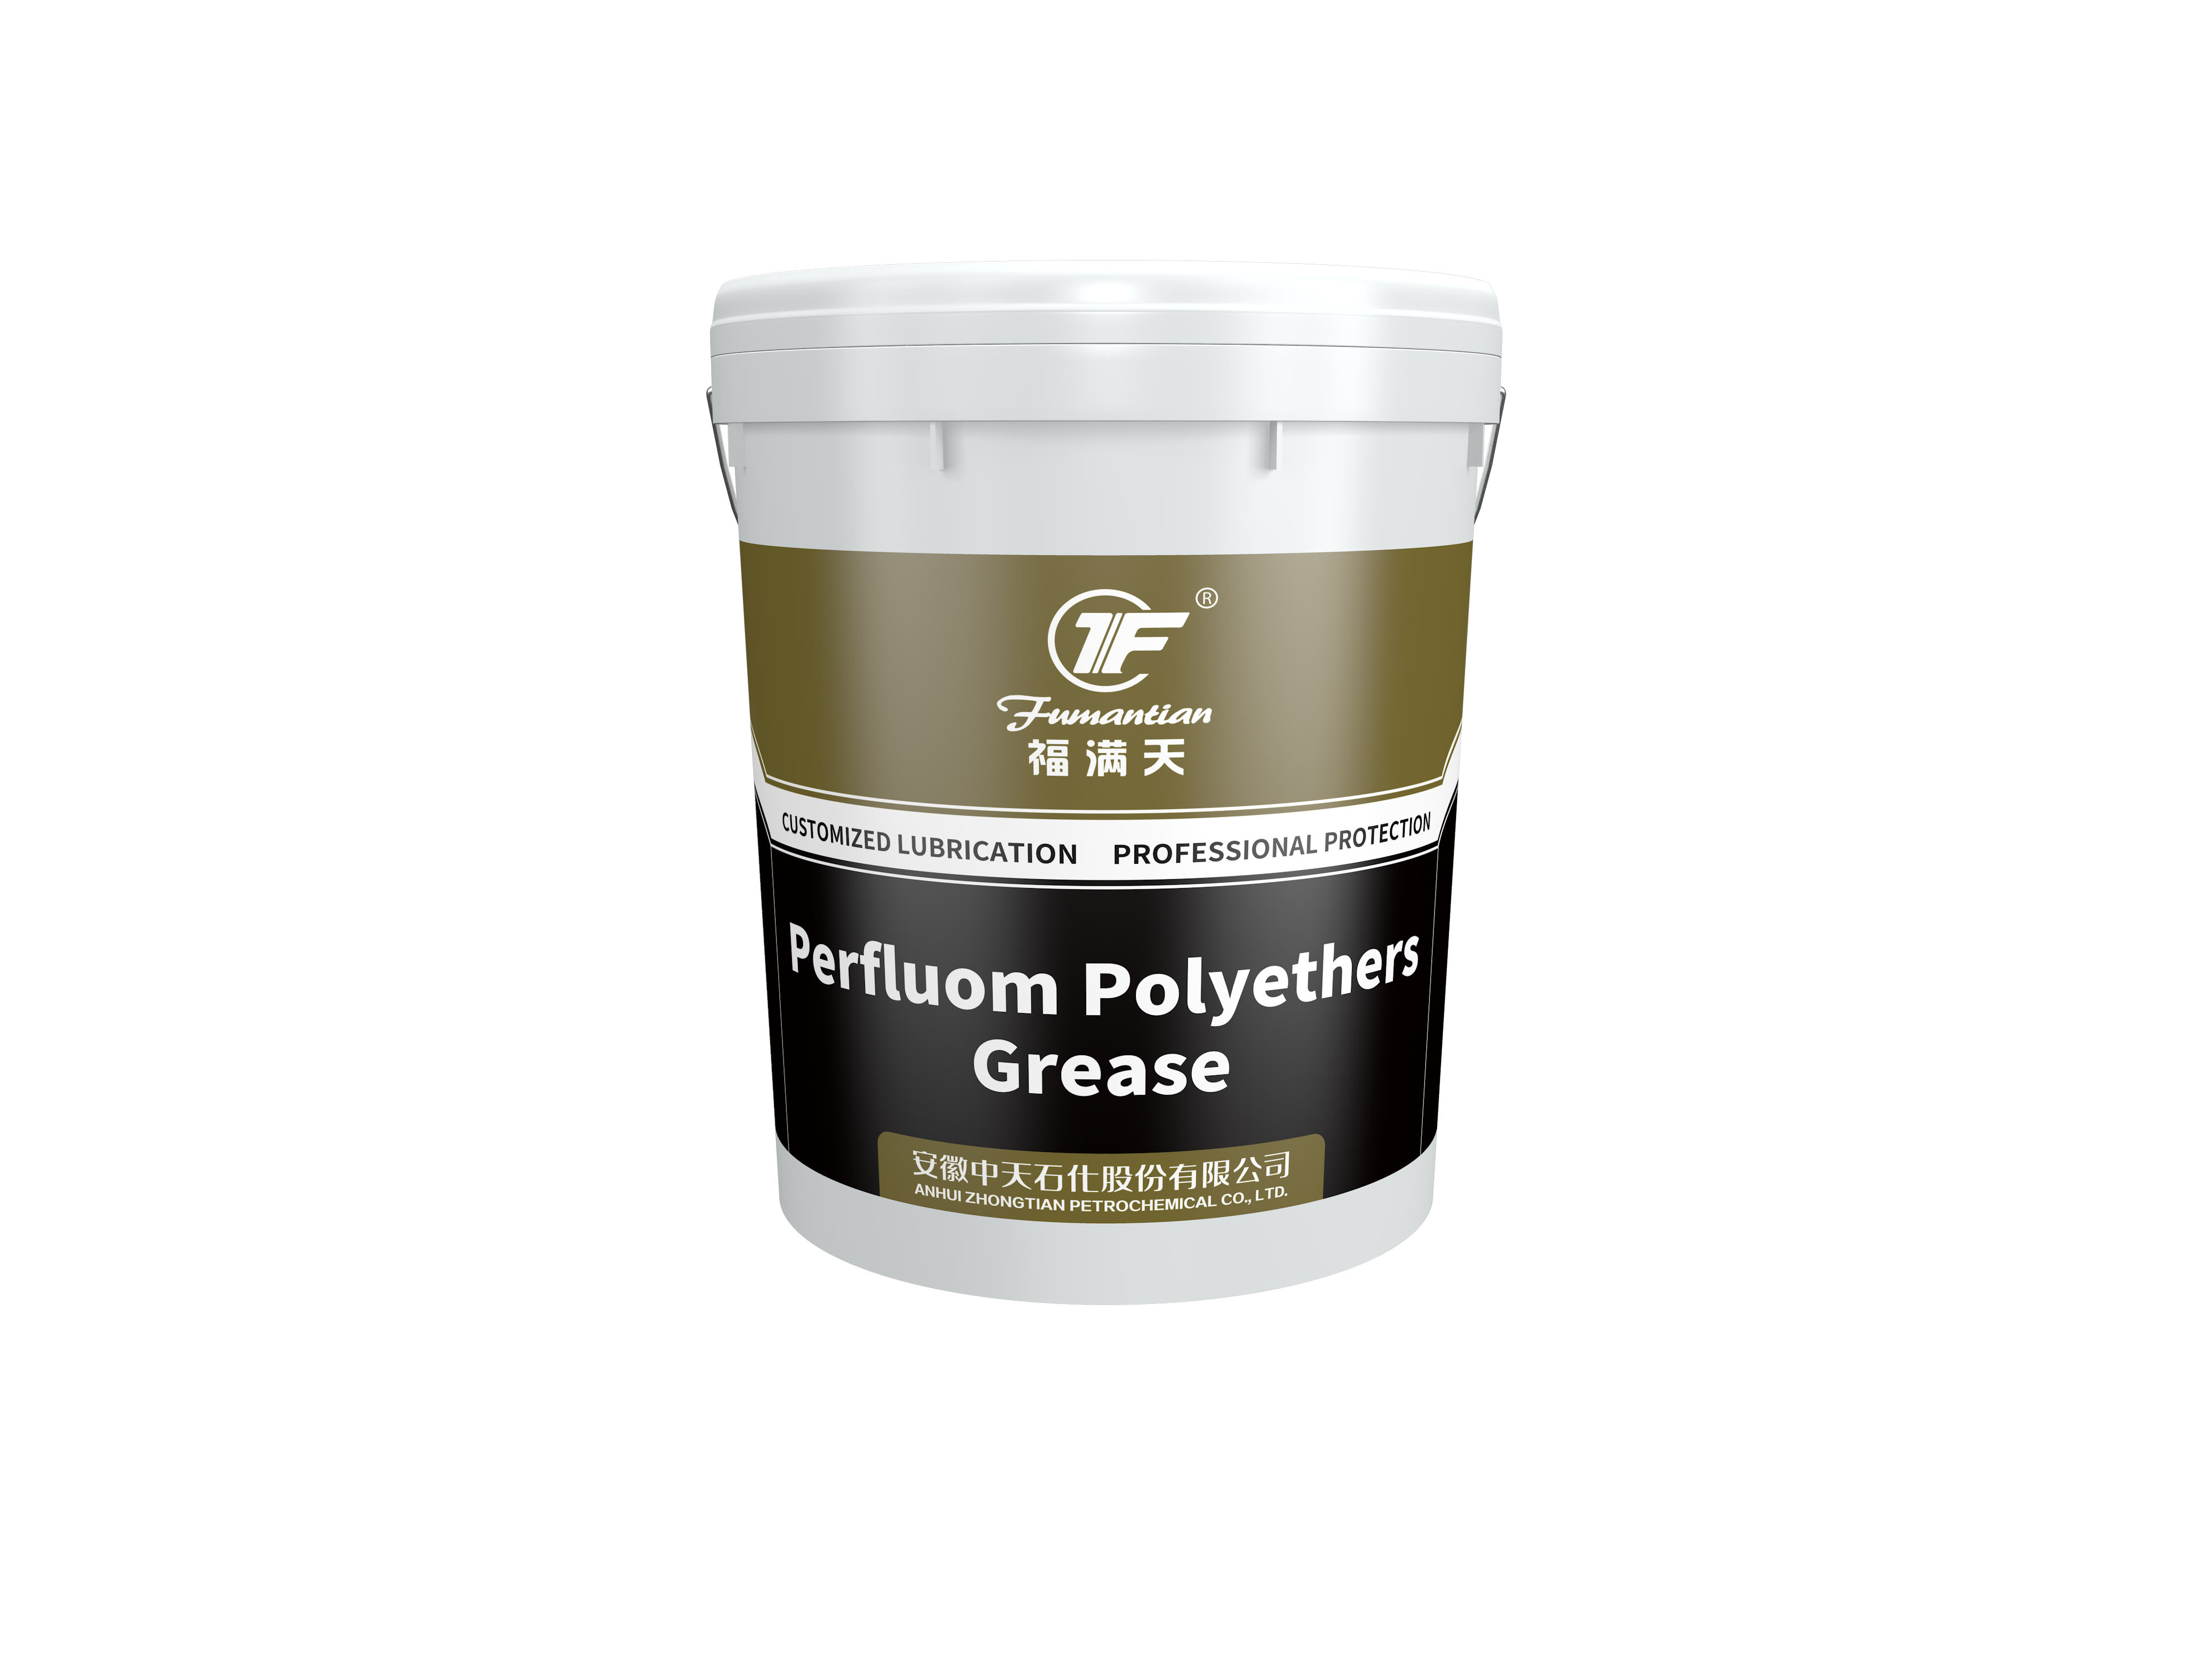 Perfluom Polyethers Grease